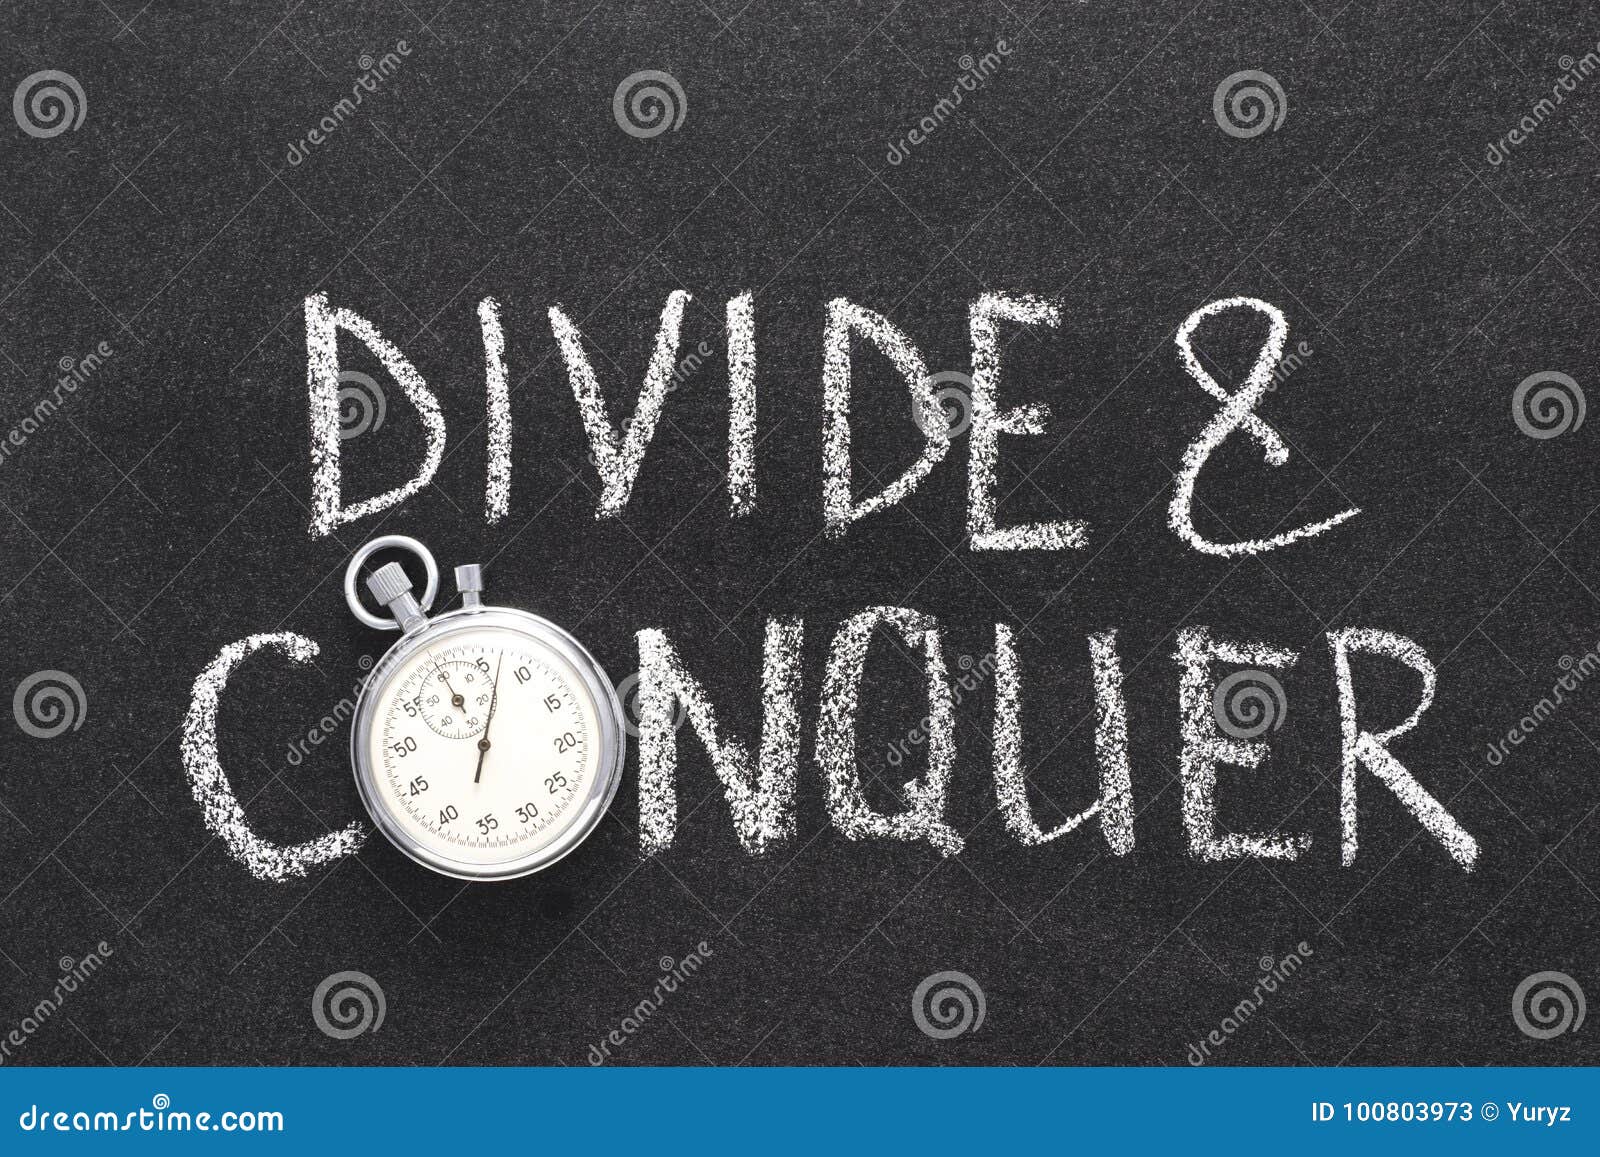 divide and conquer watch